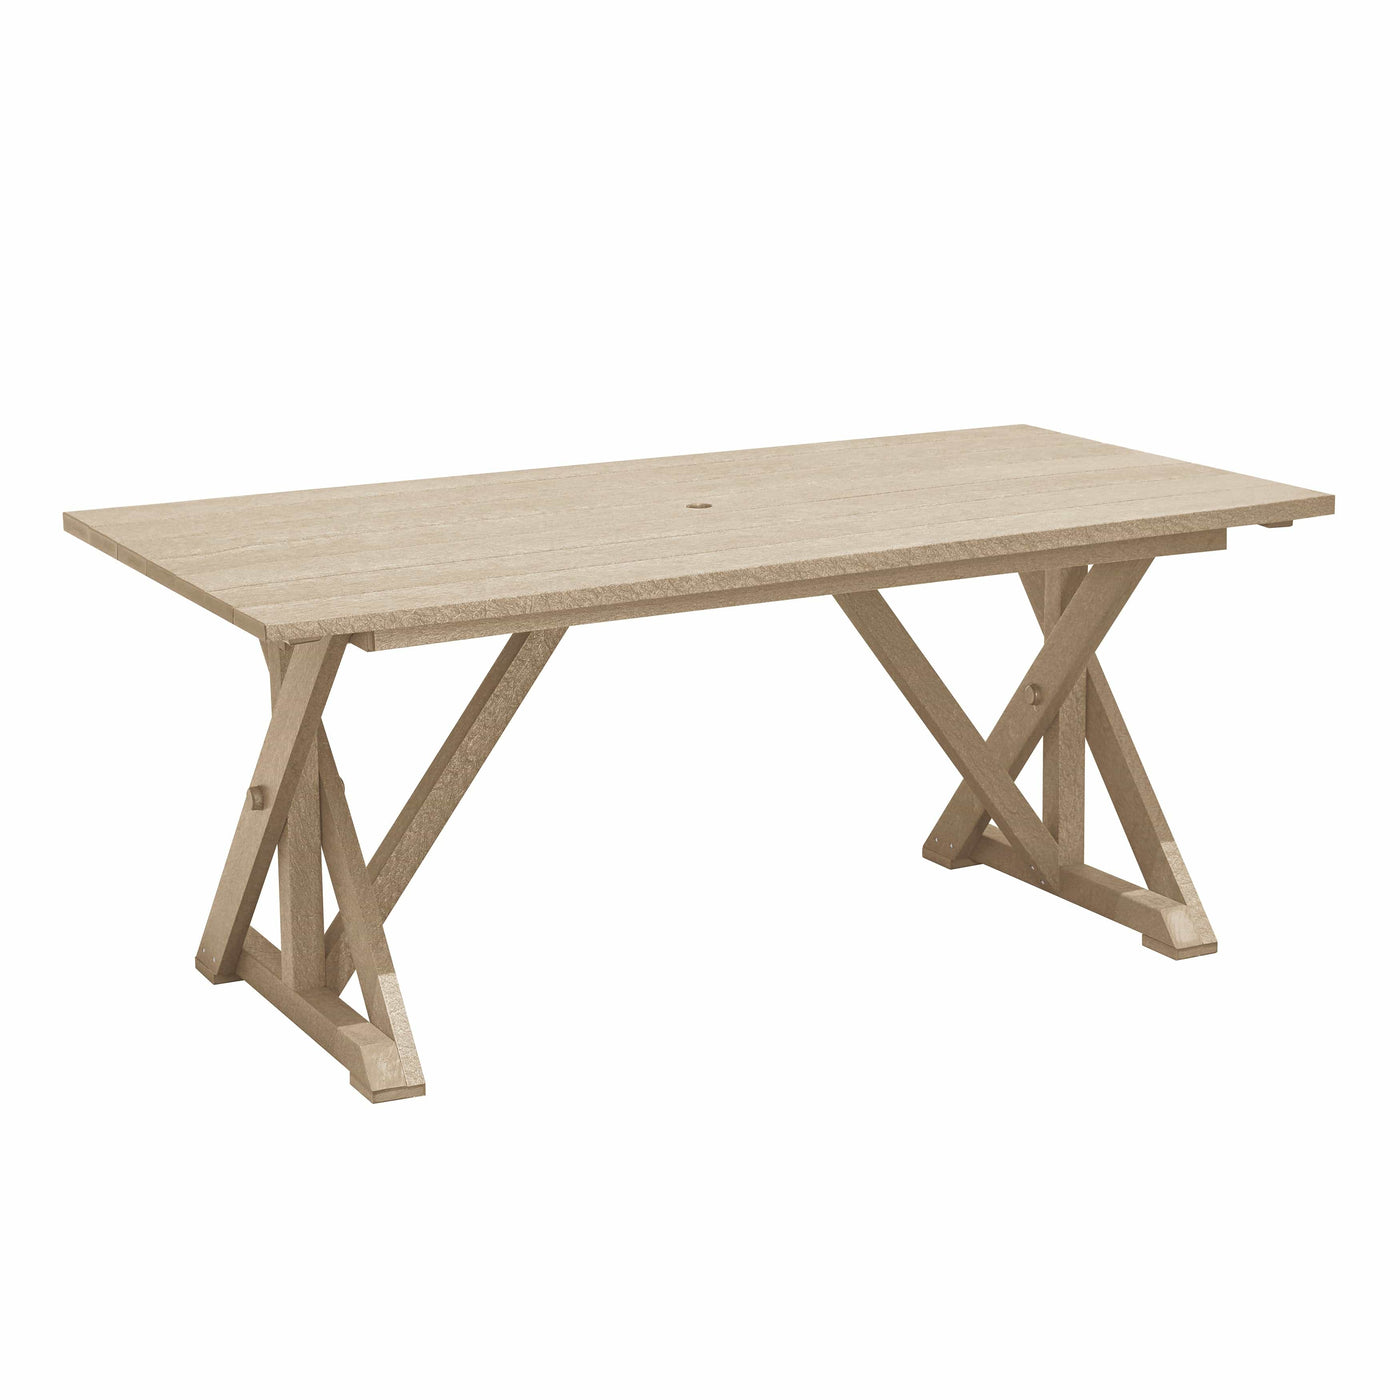 38" Wide Harvest Dining Table w/ 2" Umbrella Hole - T203 Beige-07